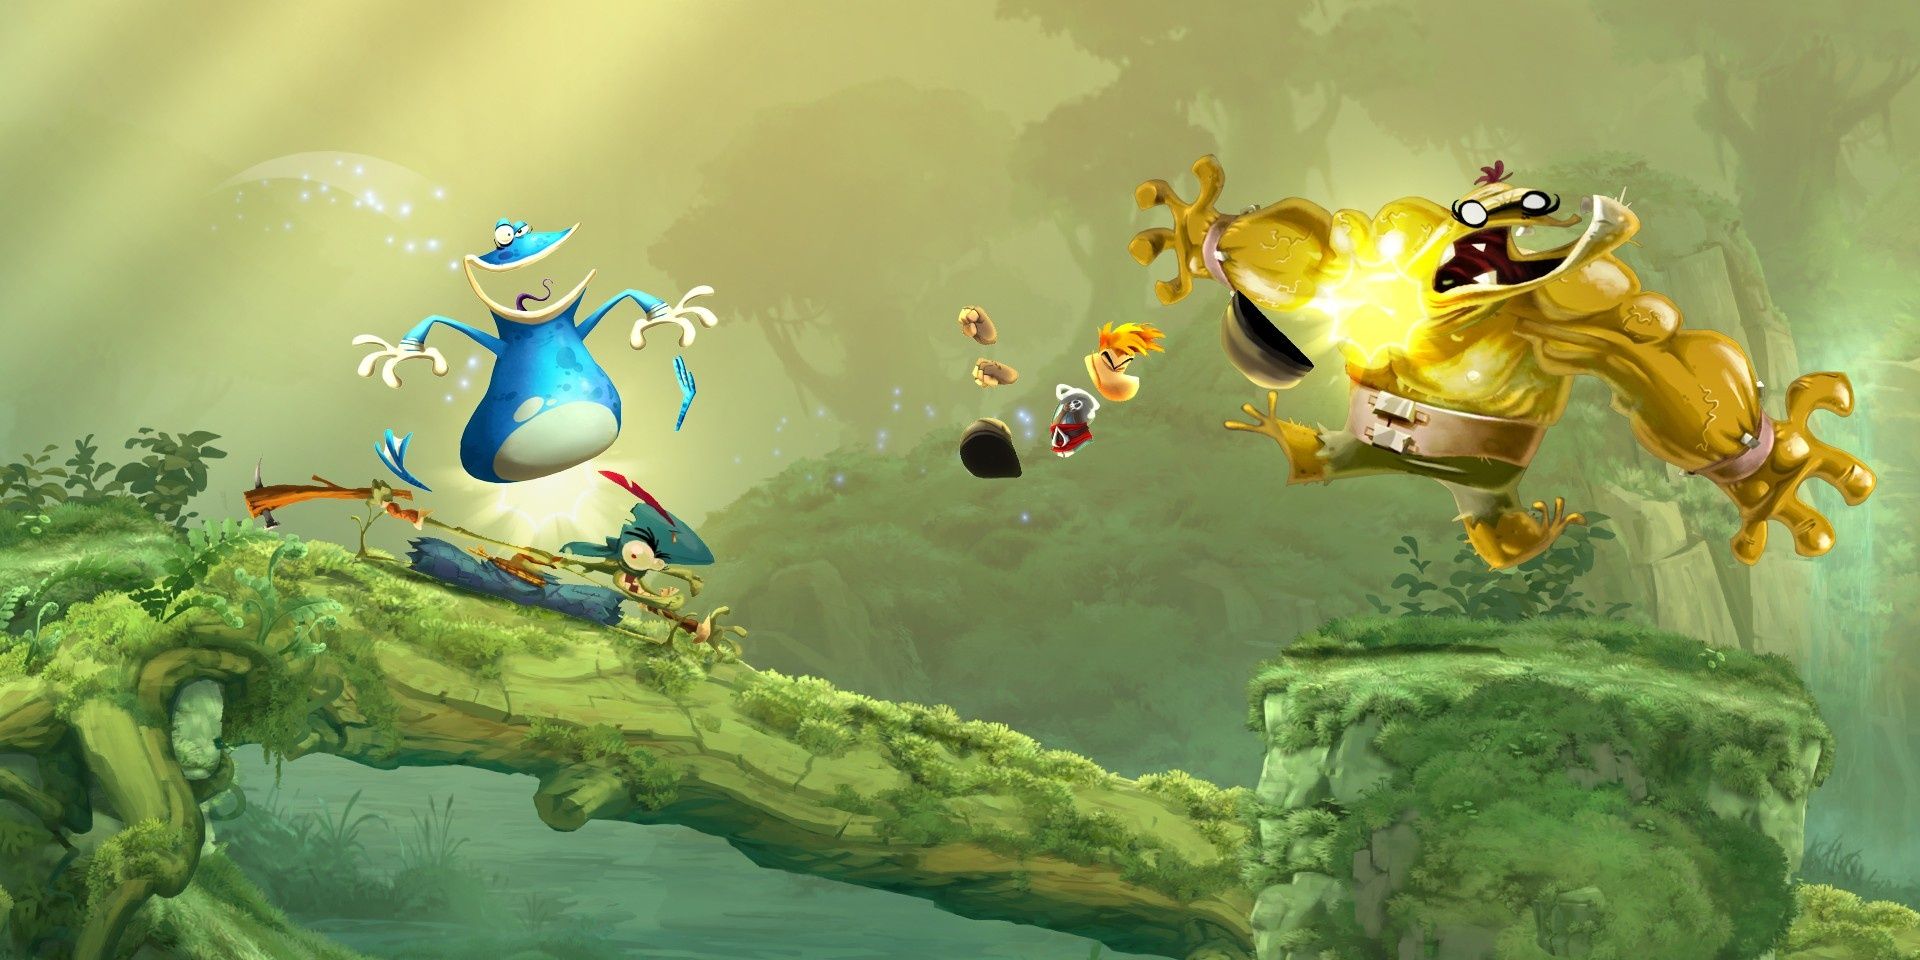 Rayman beating up bad guys in Rayman Legends